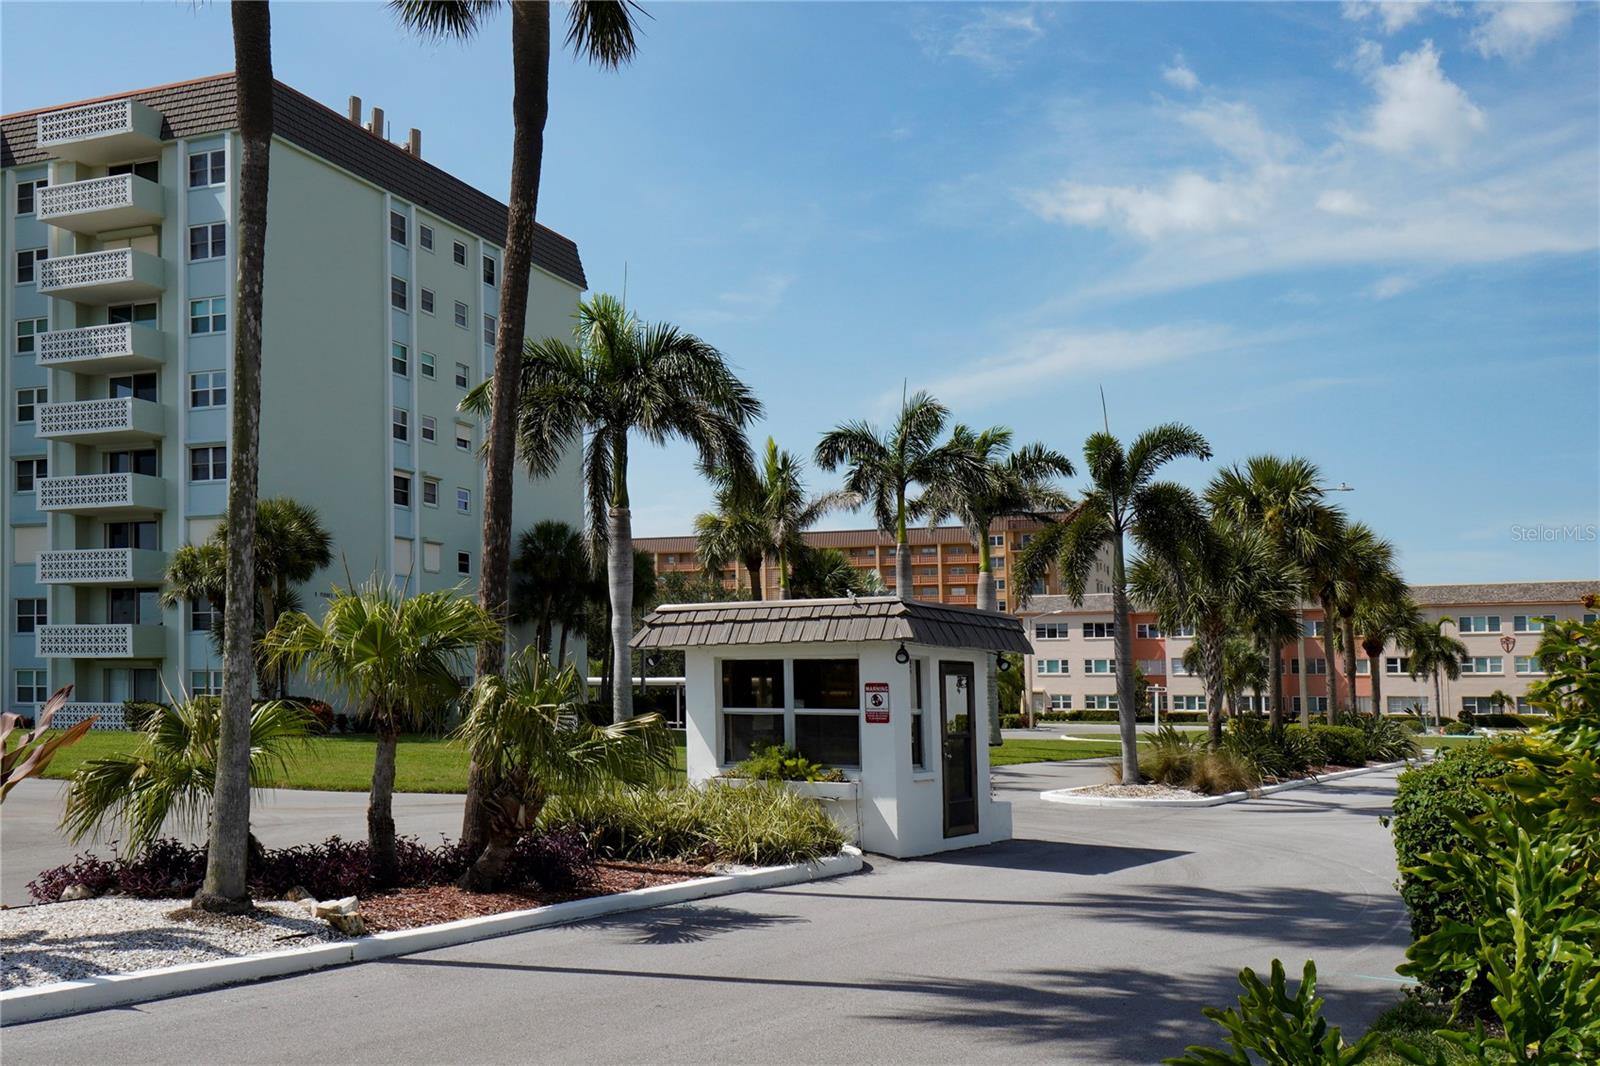 Royal Stewart Arms is a 55+ Condo Community featuring heated pool, Tennis courts, Shuffleboard, Pickleball, community center, sauna, fishing pier, and so much more! Located on the beautiful Dunedin Causeway just before Honeymoon State Park & Beaches.